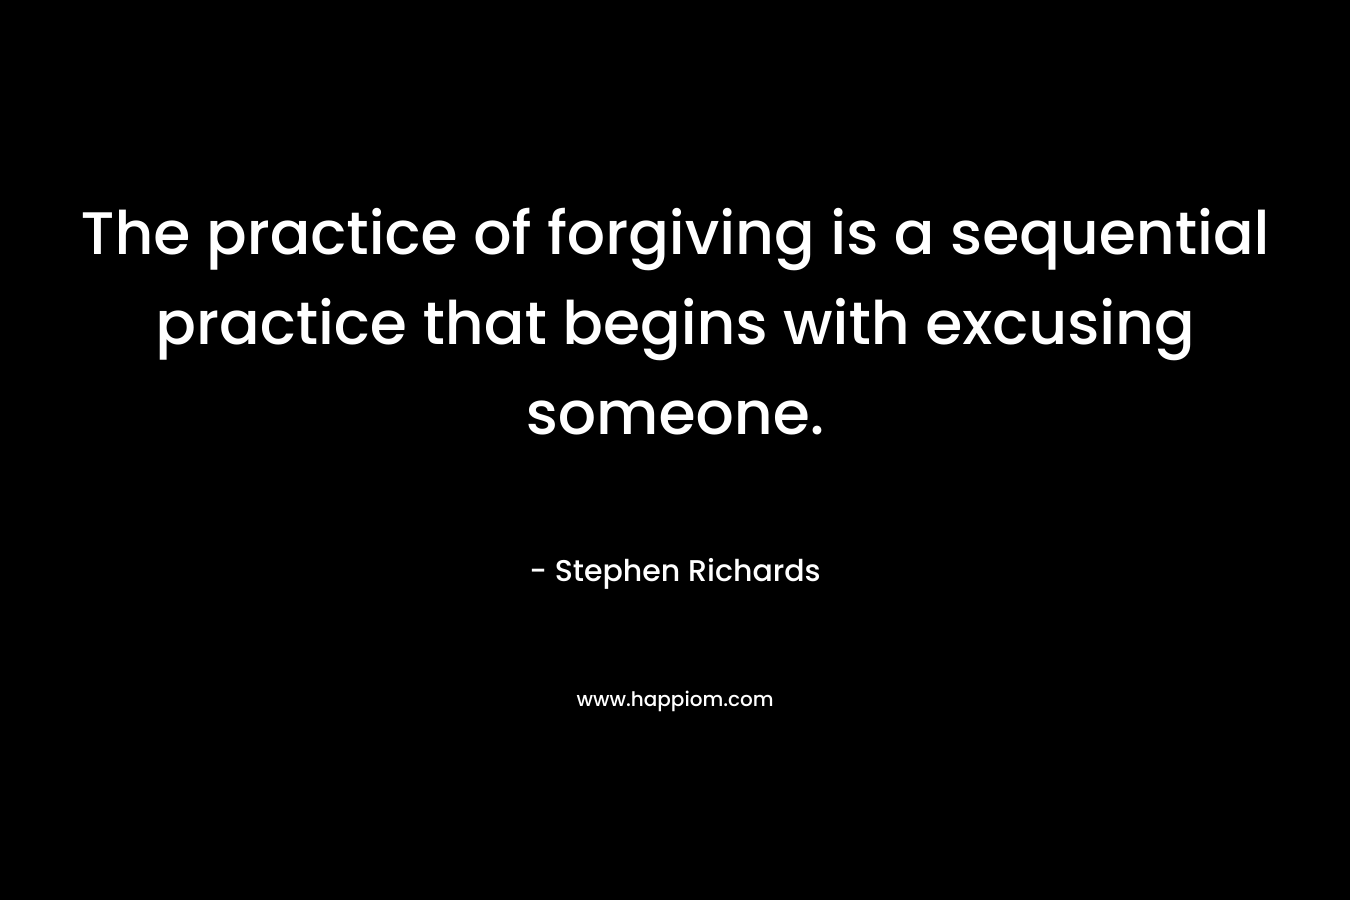 The practice of forgiving is a sequential practice that begins with excusing someone.